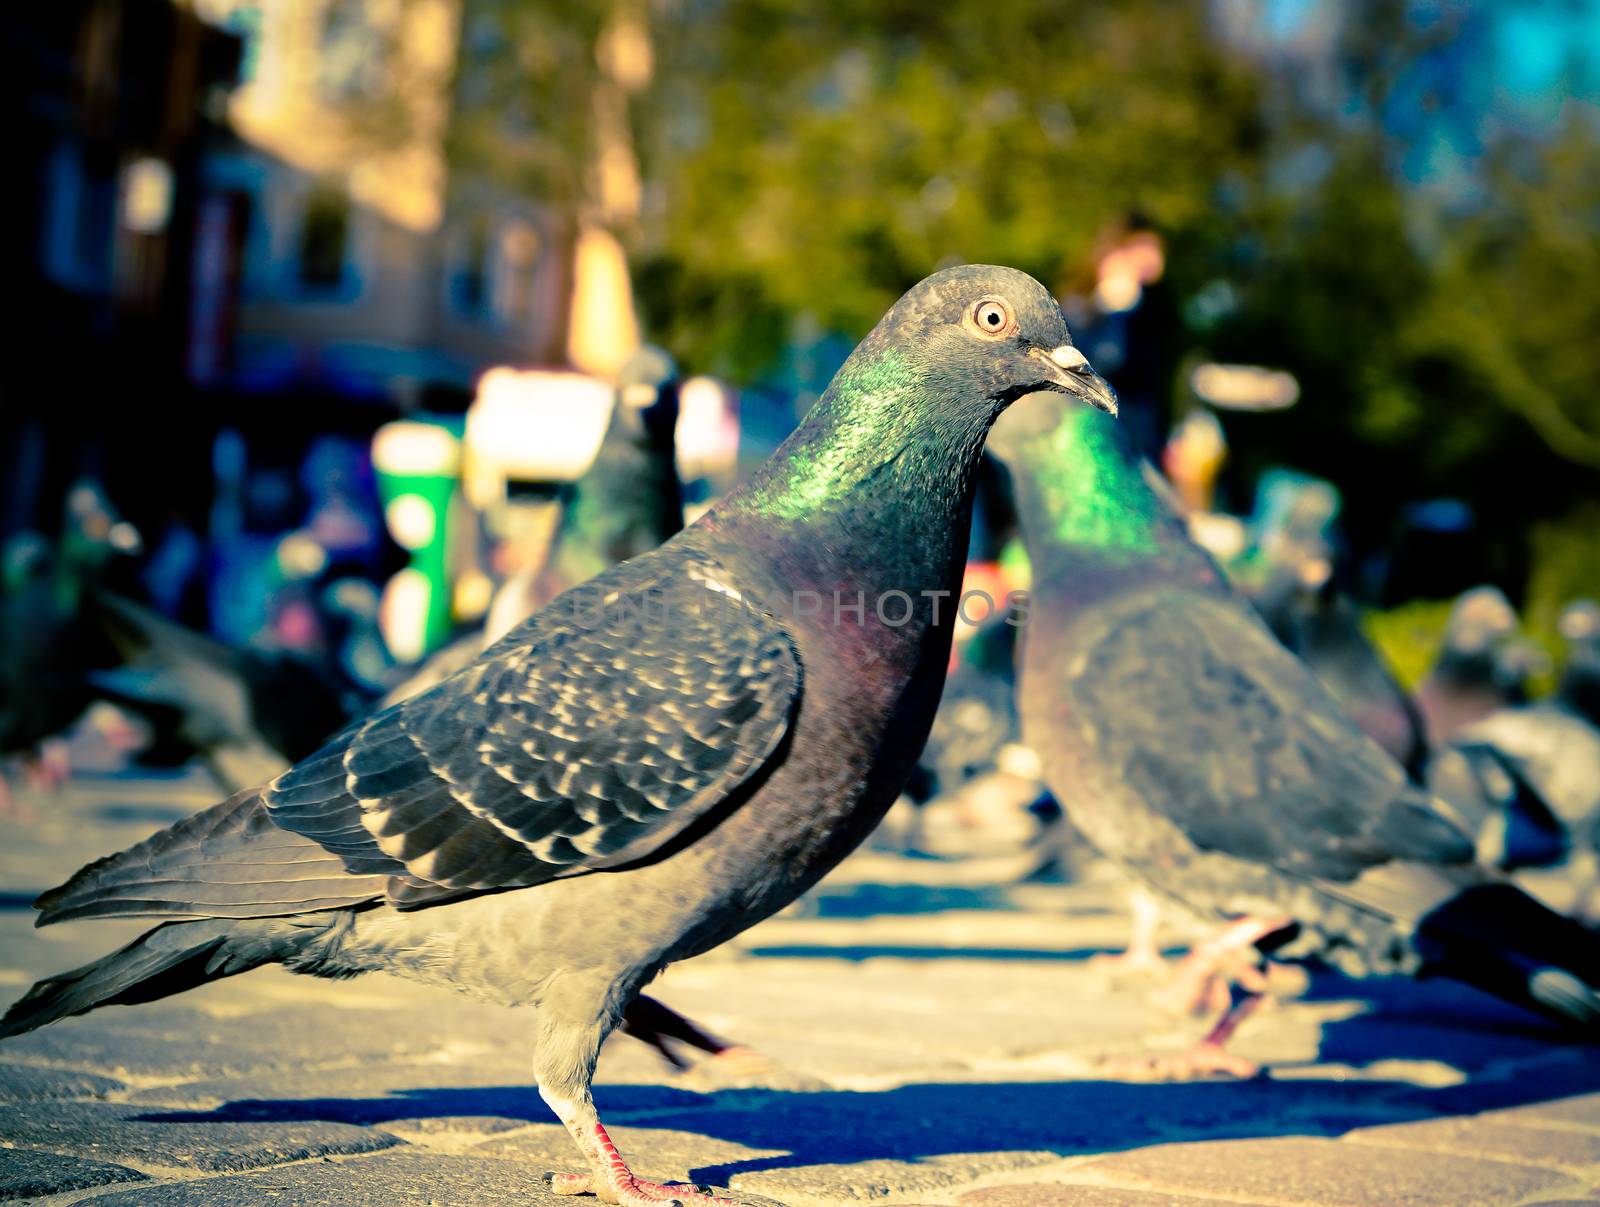 birds pigeons on the streets of the city by Oleczka11